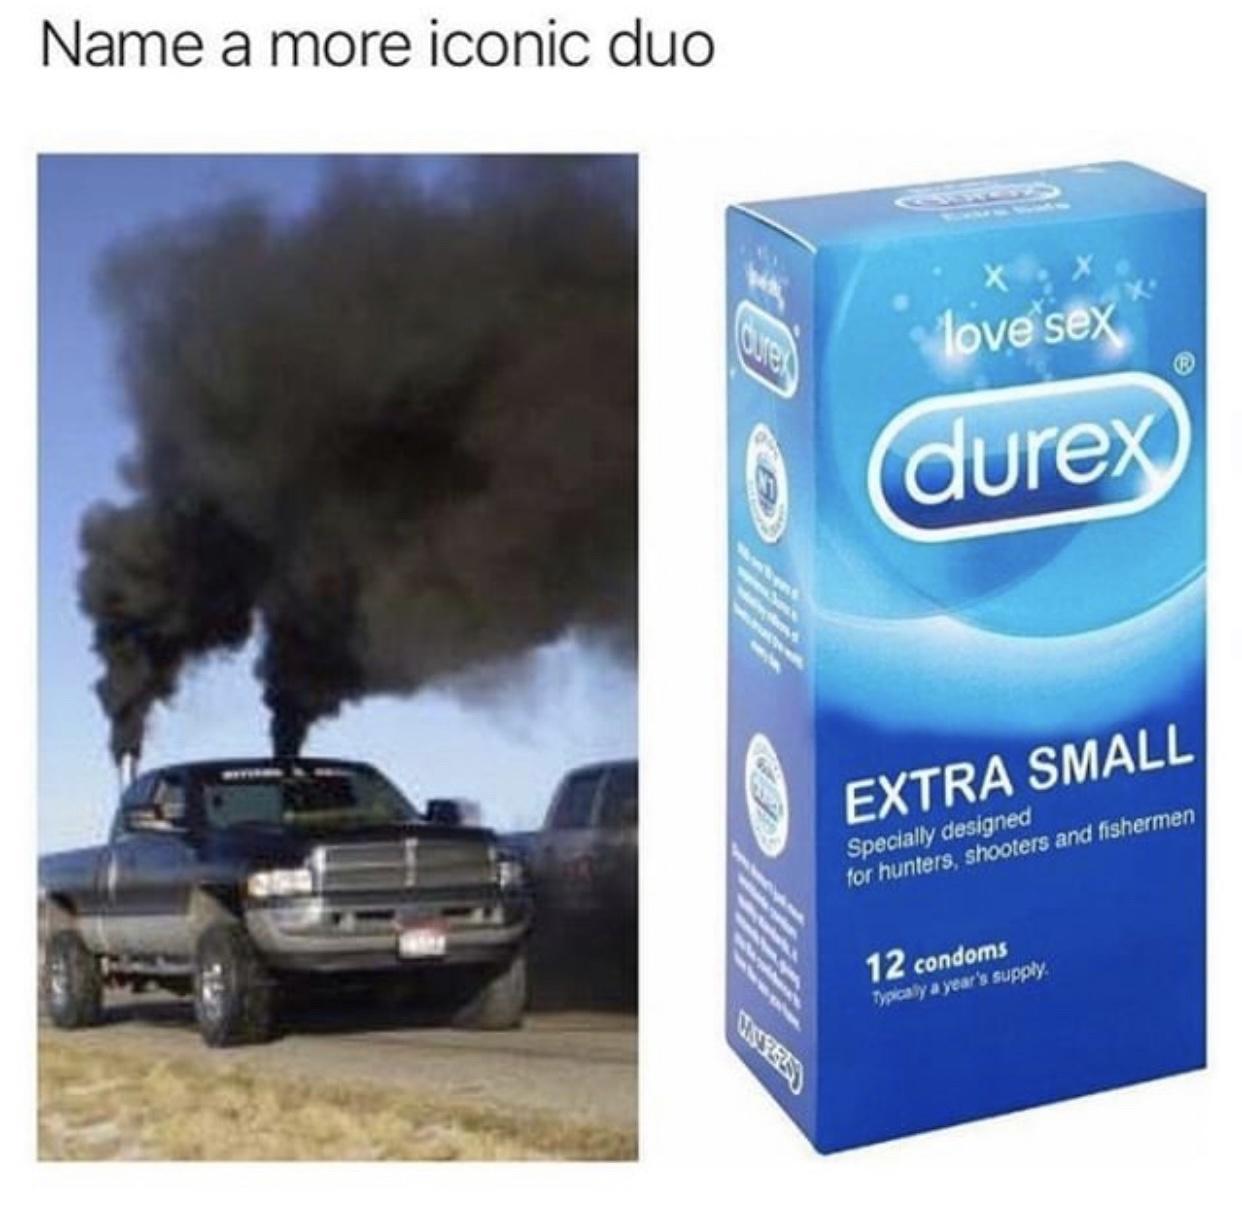 extra extra small condoms meme - Name a more iconic duo love sex durex Extra Small Specially designed for hunters, shooters and fishermen 12 condoms Typically a year's supply